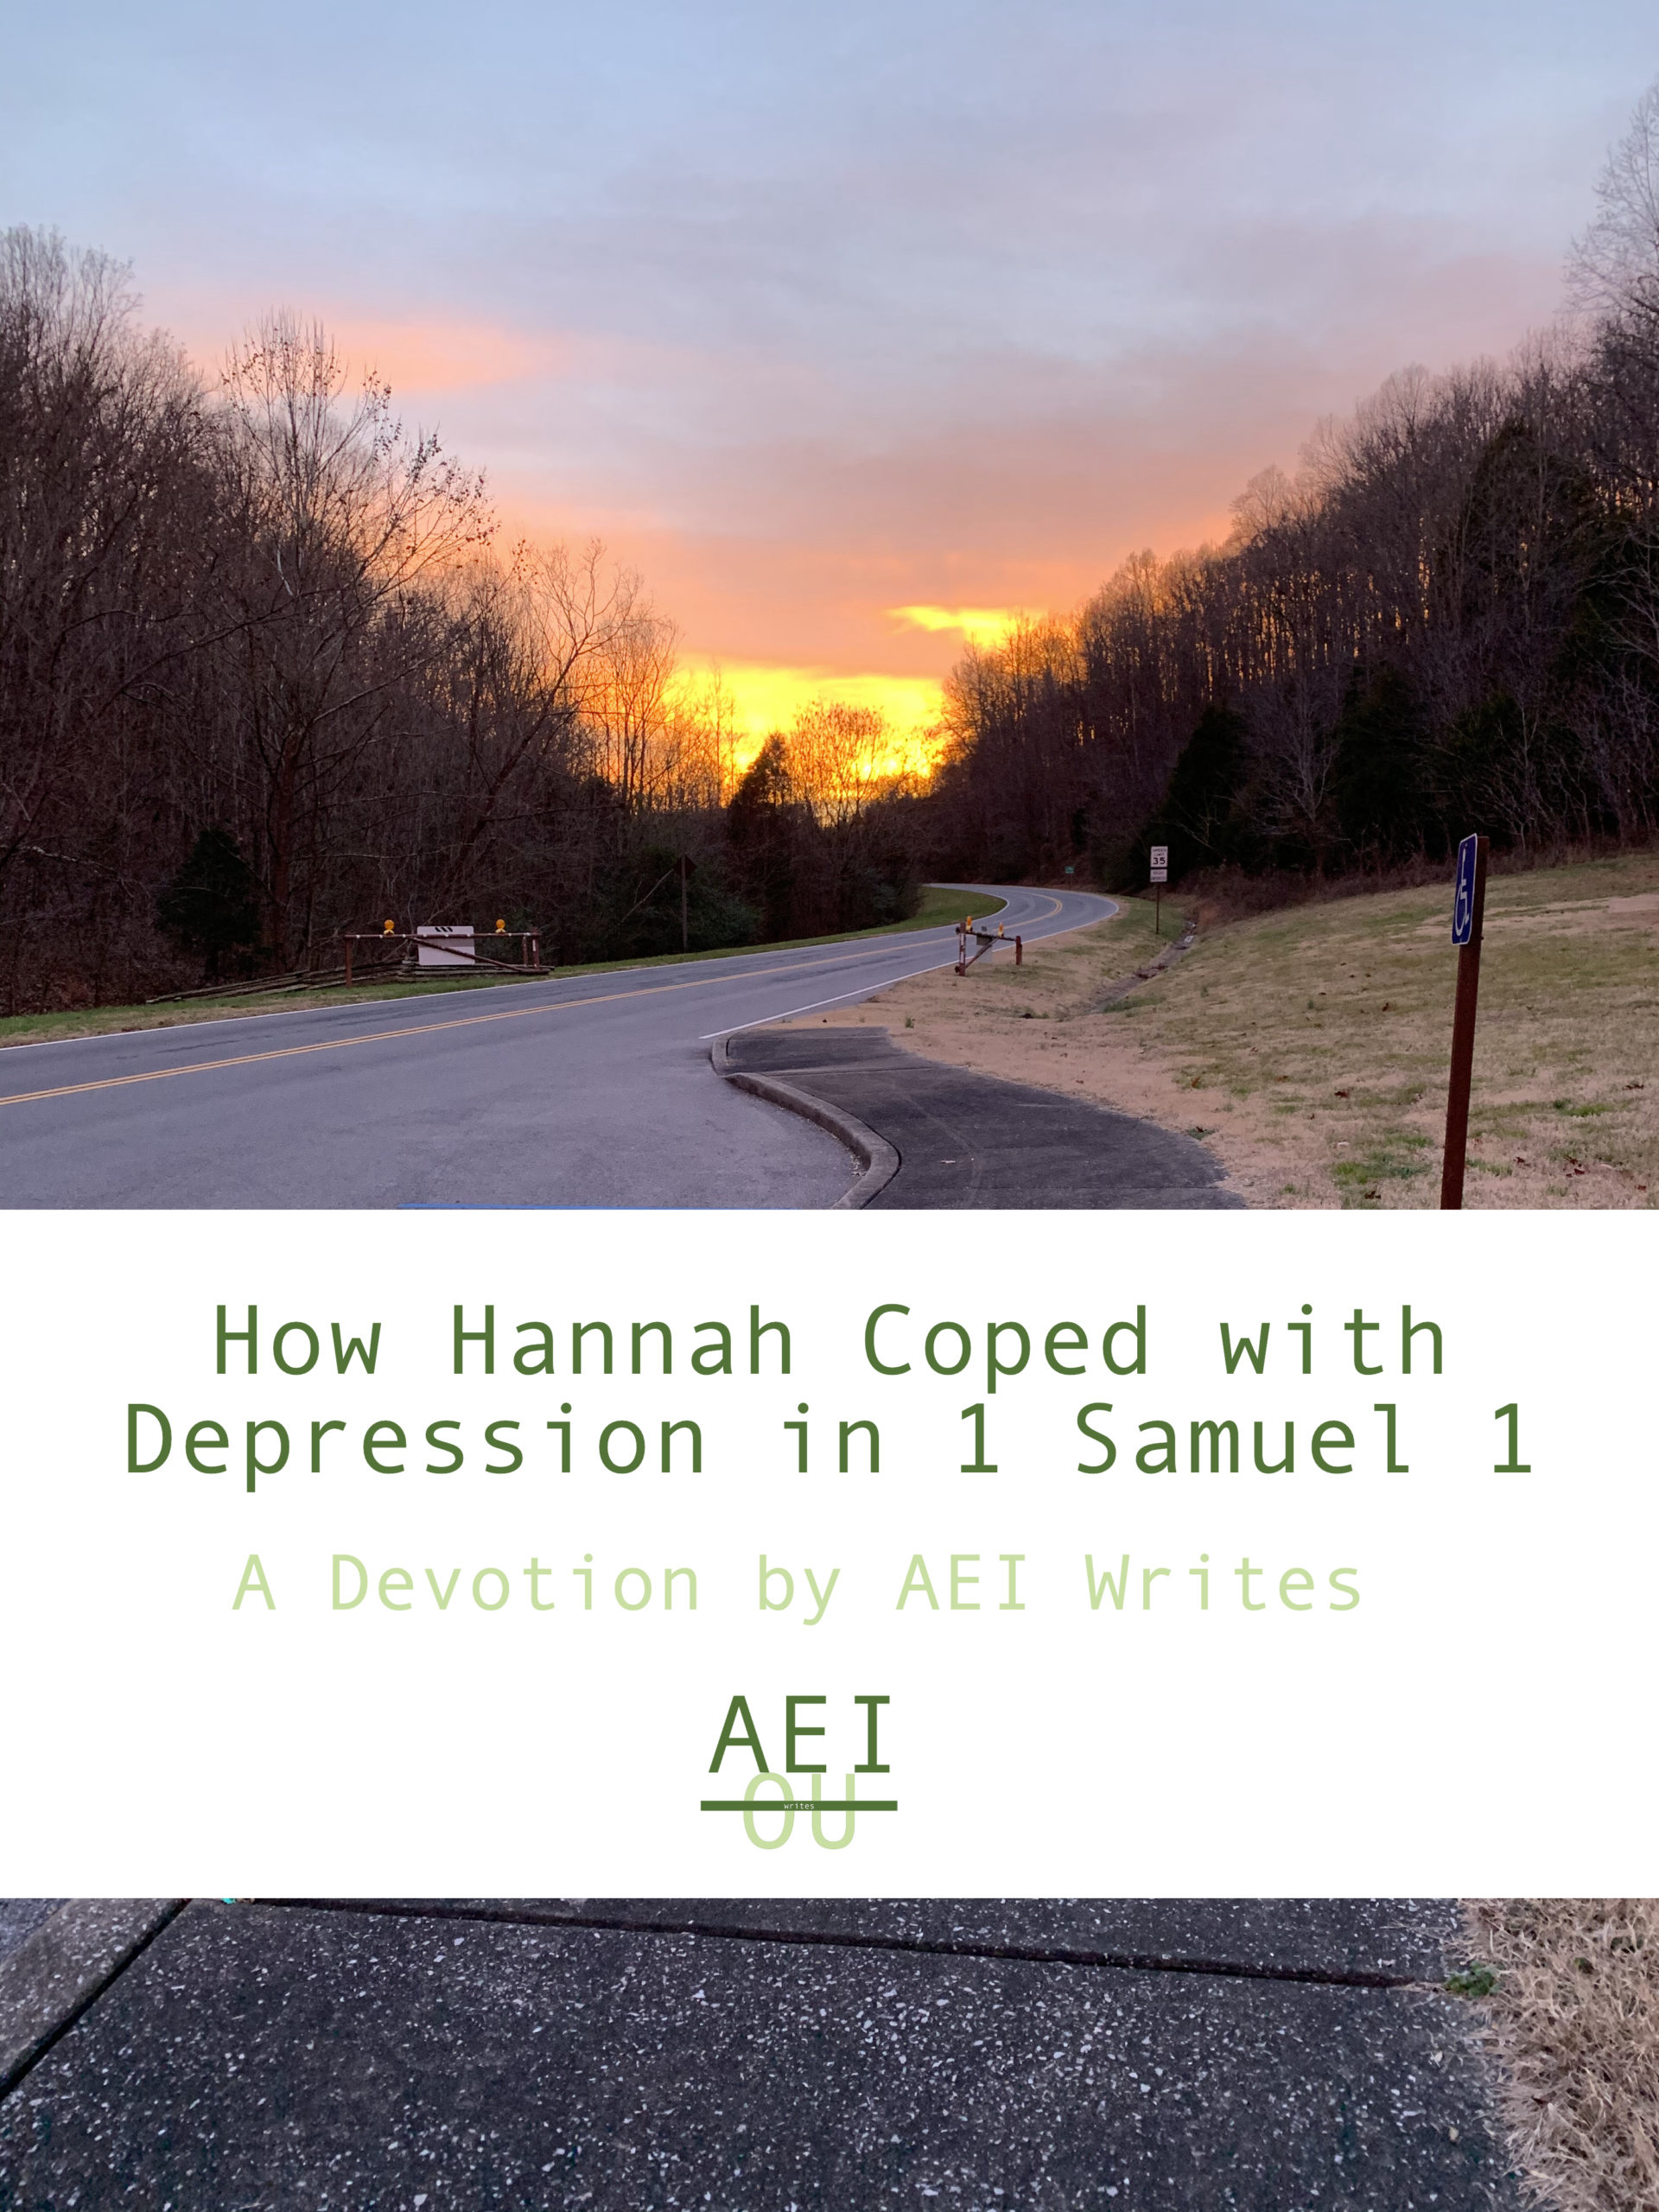 How Hannah Coped with Depression in 1 Samuel 1